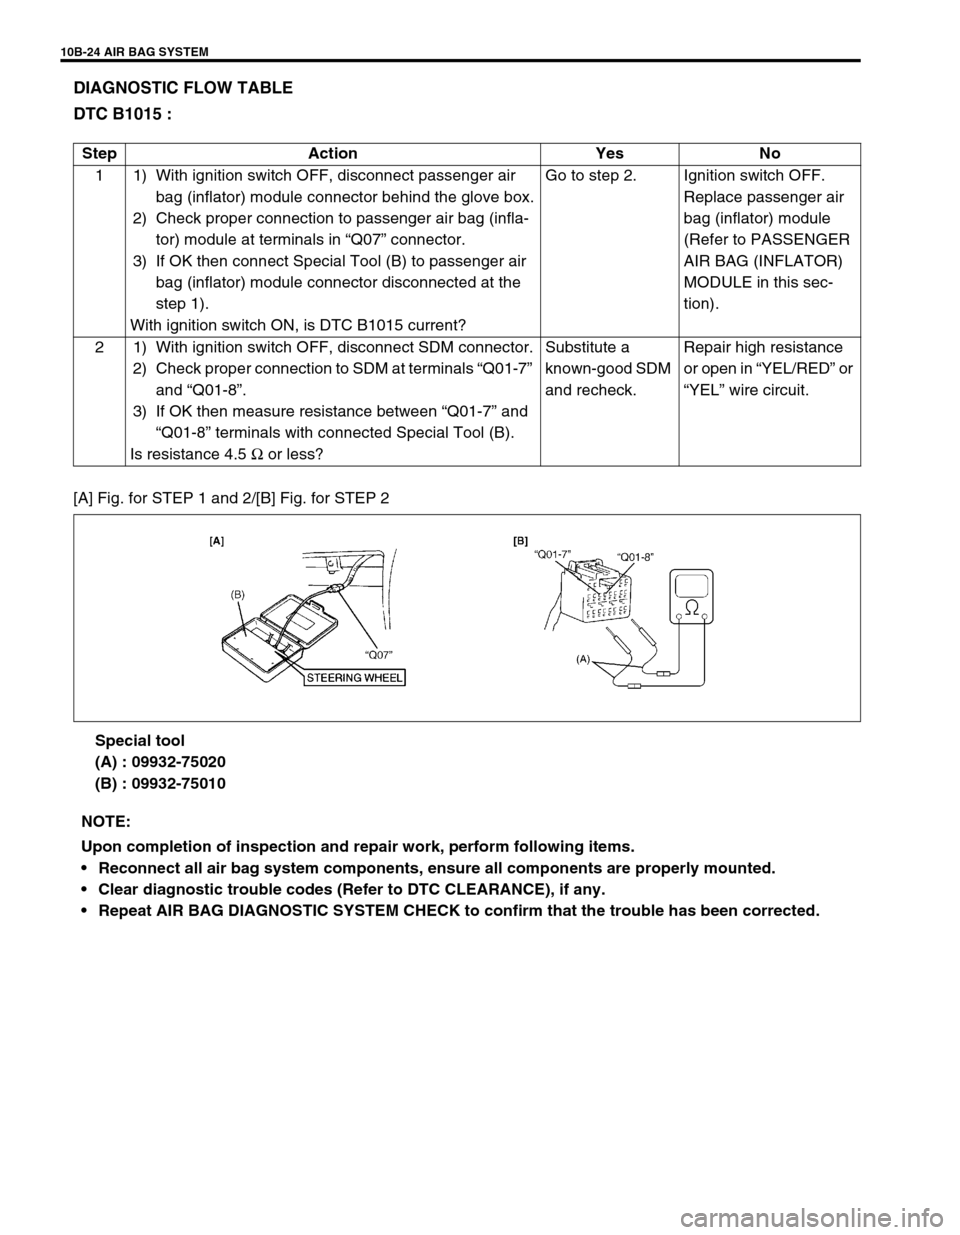 SUZUKI GRAND VITARA 2001 2.G Owners Manual 10B-24 AIR BAG SYSTEM
DIAGNOSTIC FLOW TABLE
DTC B1015 :
[A] Fig. for STEP 1 and 2/[B] Fig. for STEP 2
Special tool
(A) : 09932-75020
(B) : 09932-75010 Step Action Yes No
1 1) With ignition switch OFF,